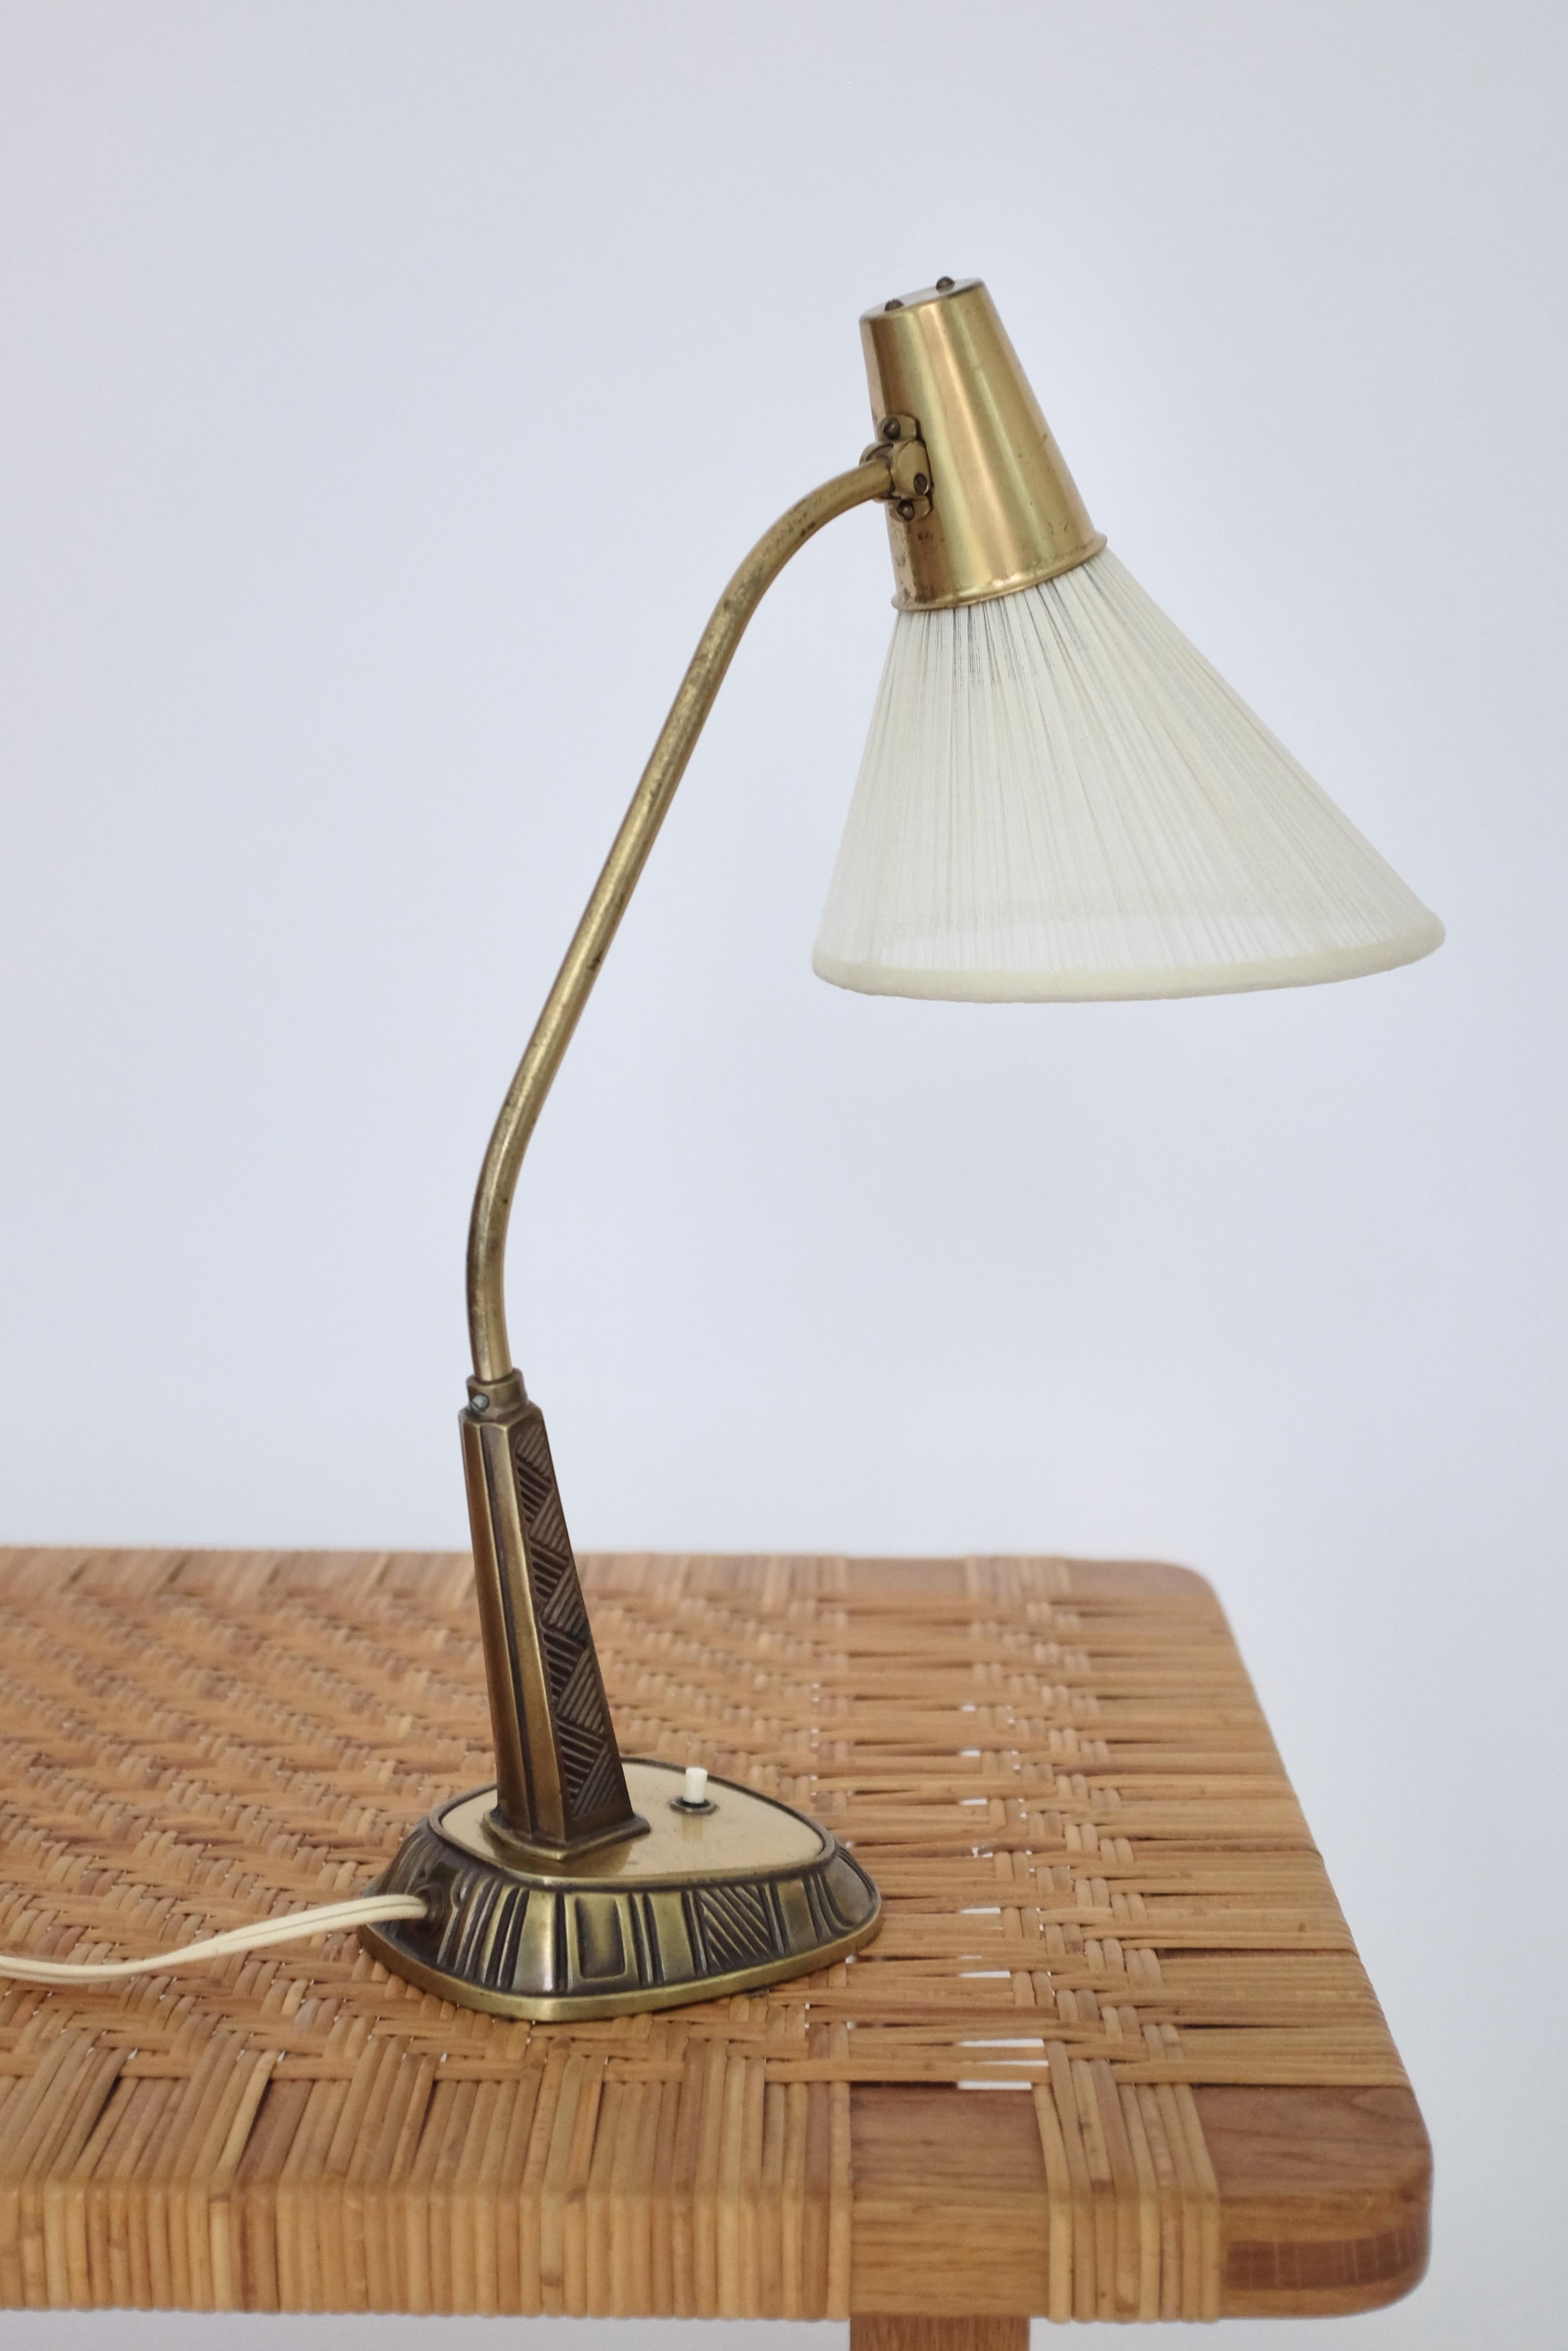 Beautiful 1950's brass table lamp Model E1139 by Sonja Katzin for ASEA. Carved striped pattern on the lamp foot with curved arm och new lampshade in original design. Age appropriate wear to the brass. Overall in a very good condition. 

Sonja